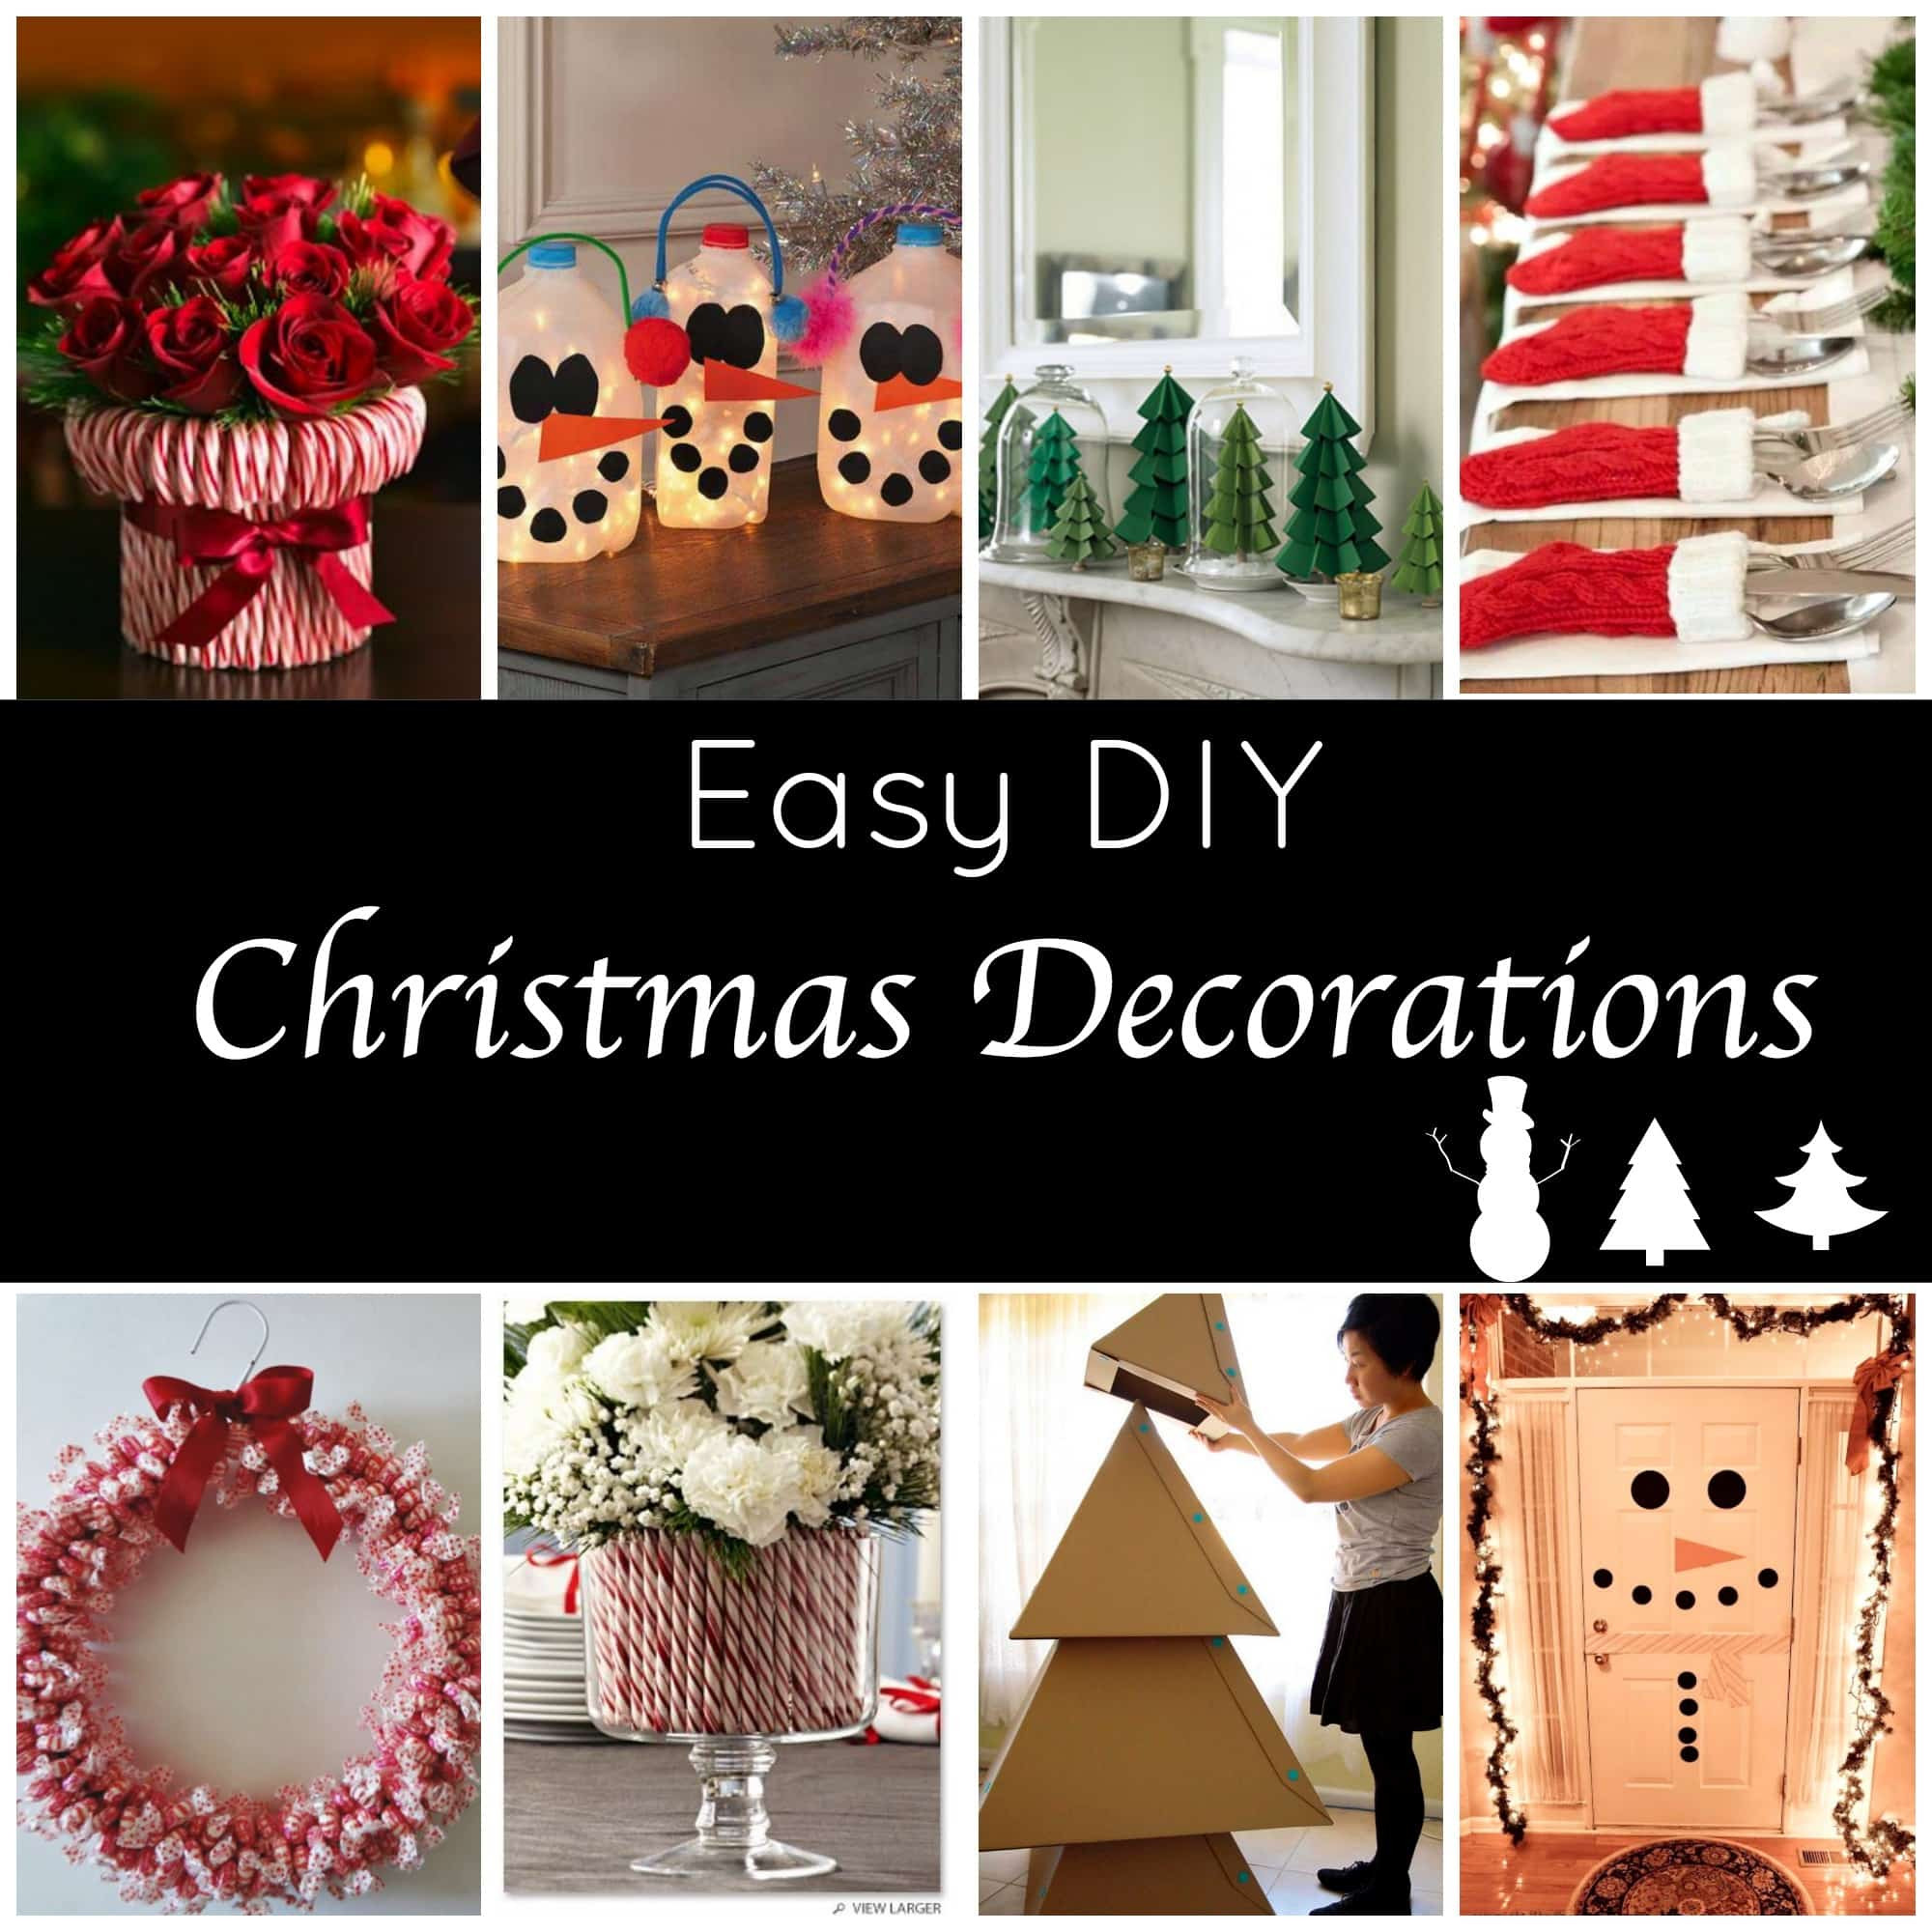 DIY Christmas Decorating
 Cute and Easy DIY Holiday Decorations for a Festive Home